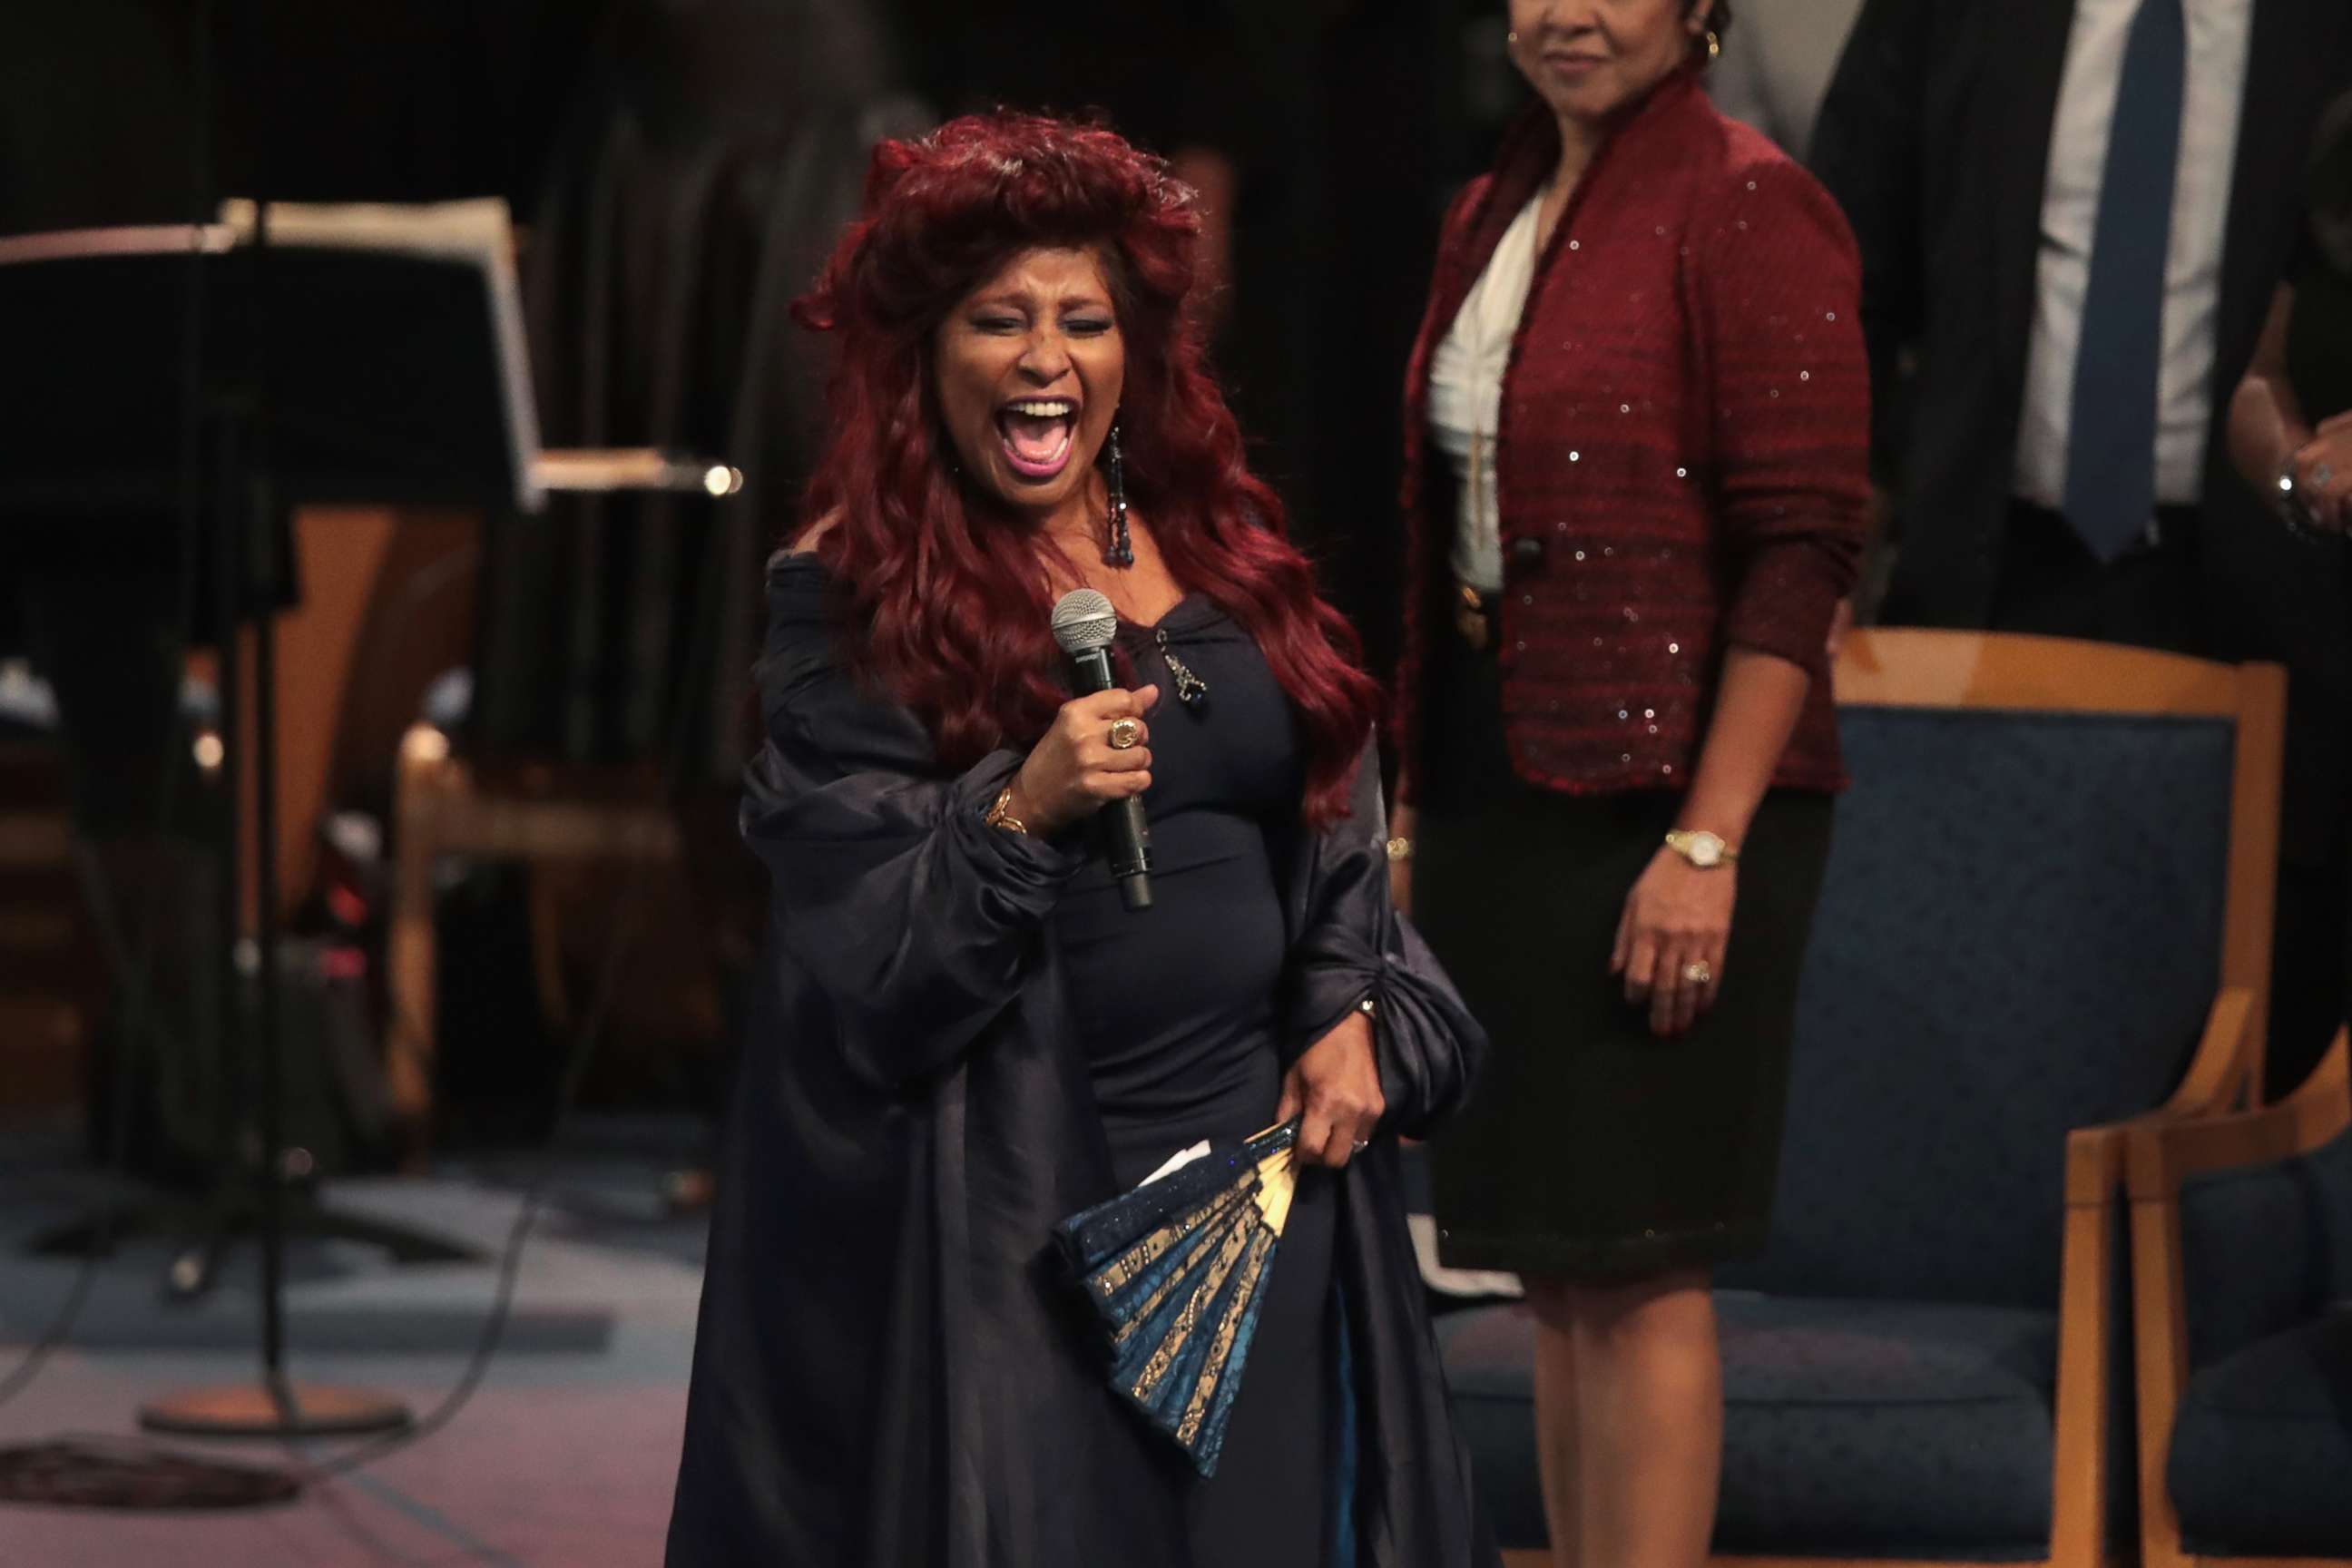 PHOTO: Singer Chaka Khan performs at the funeral for Aretha Franklin at the Greater Grace Temple on Aug. 31, 2018 in Detroit.